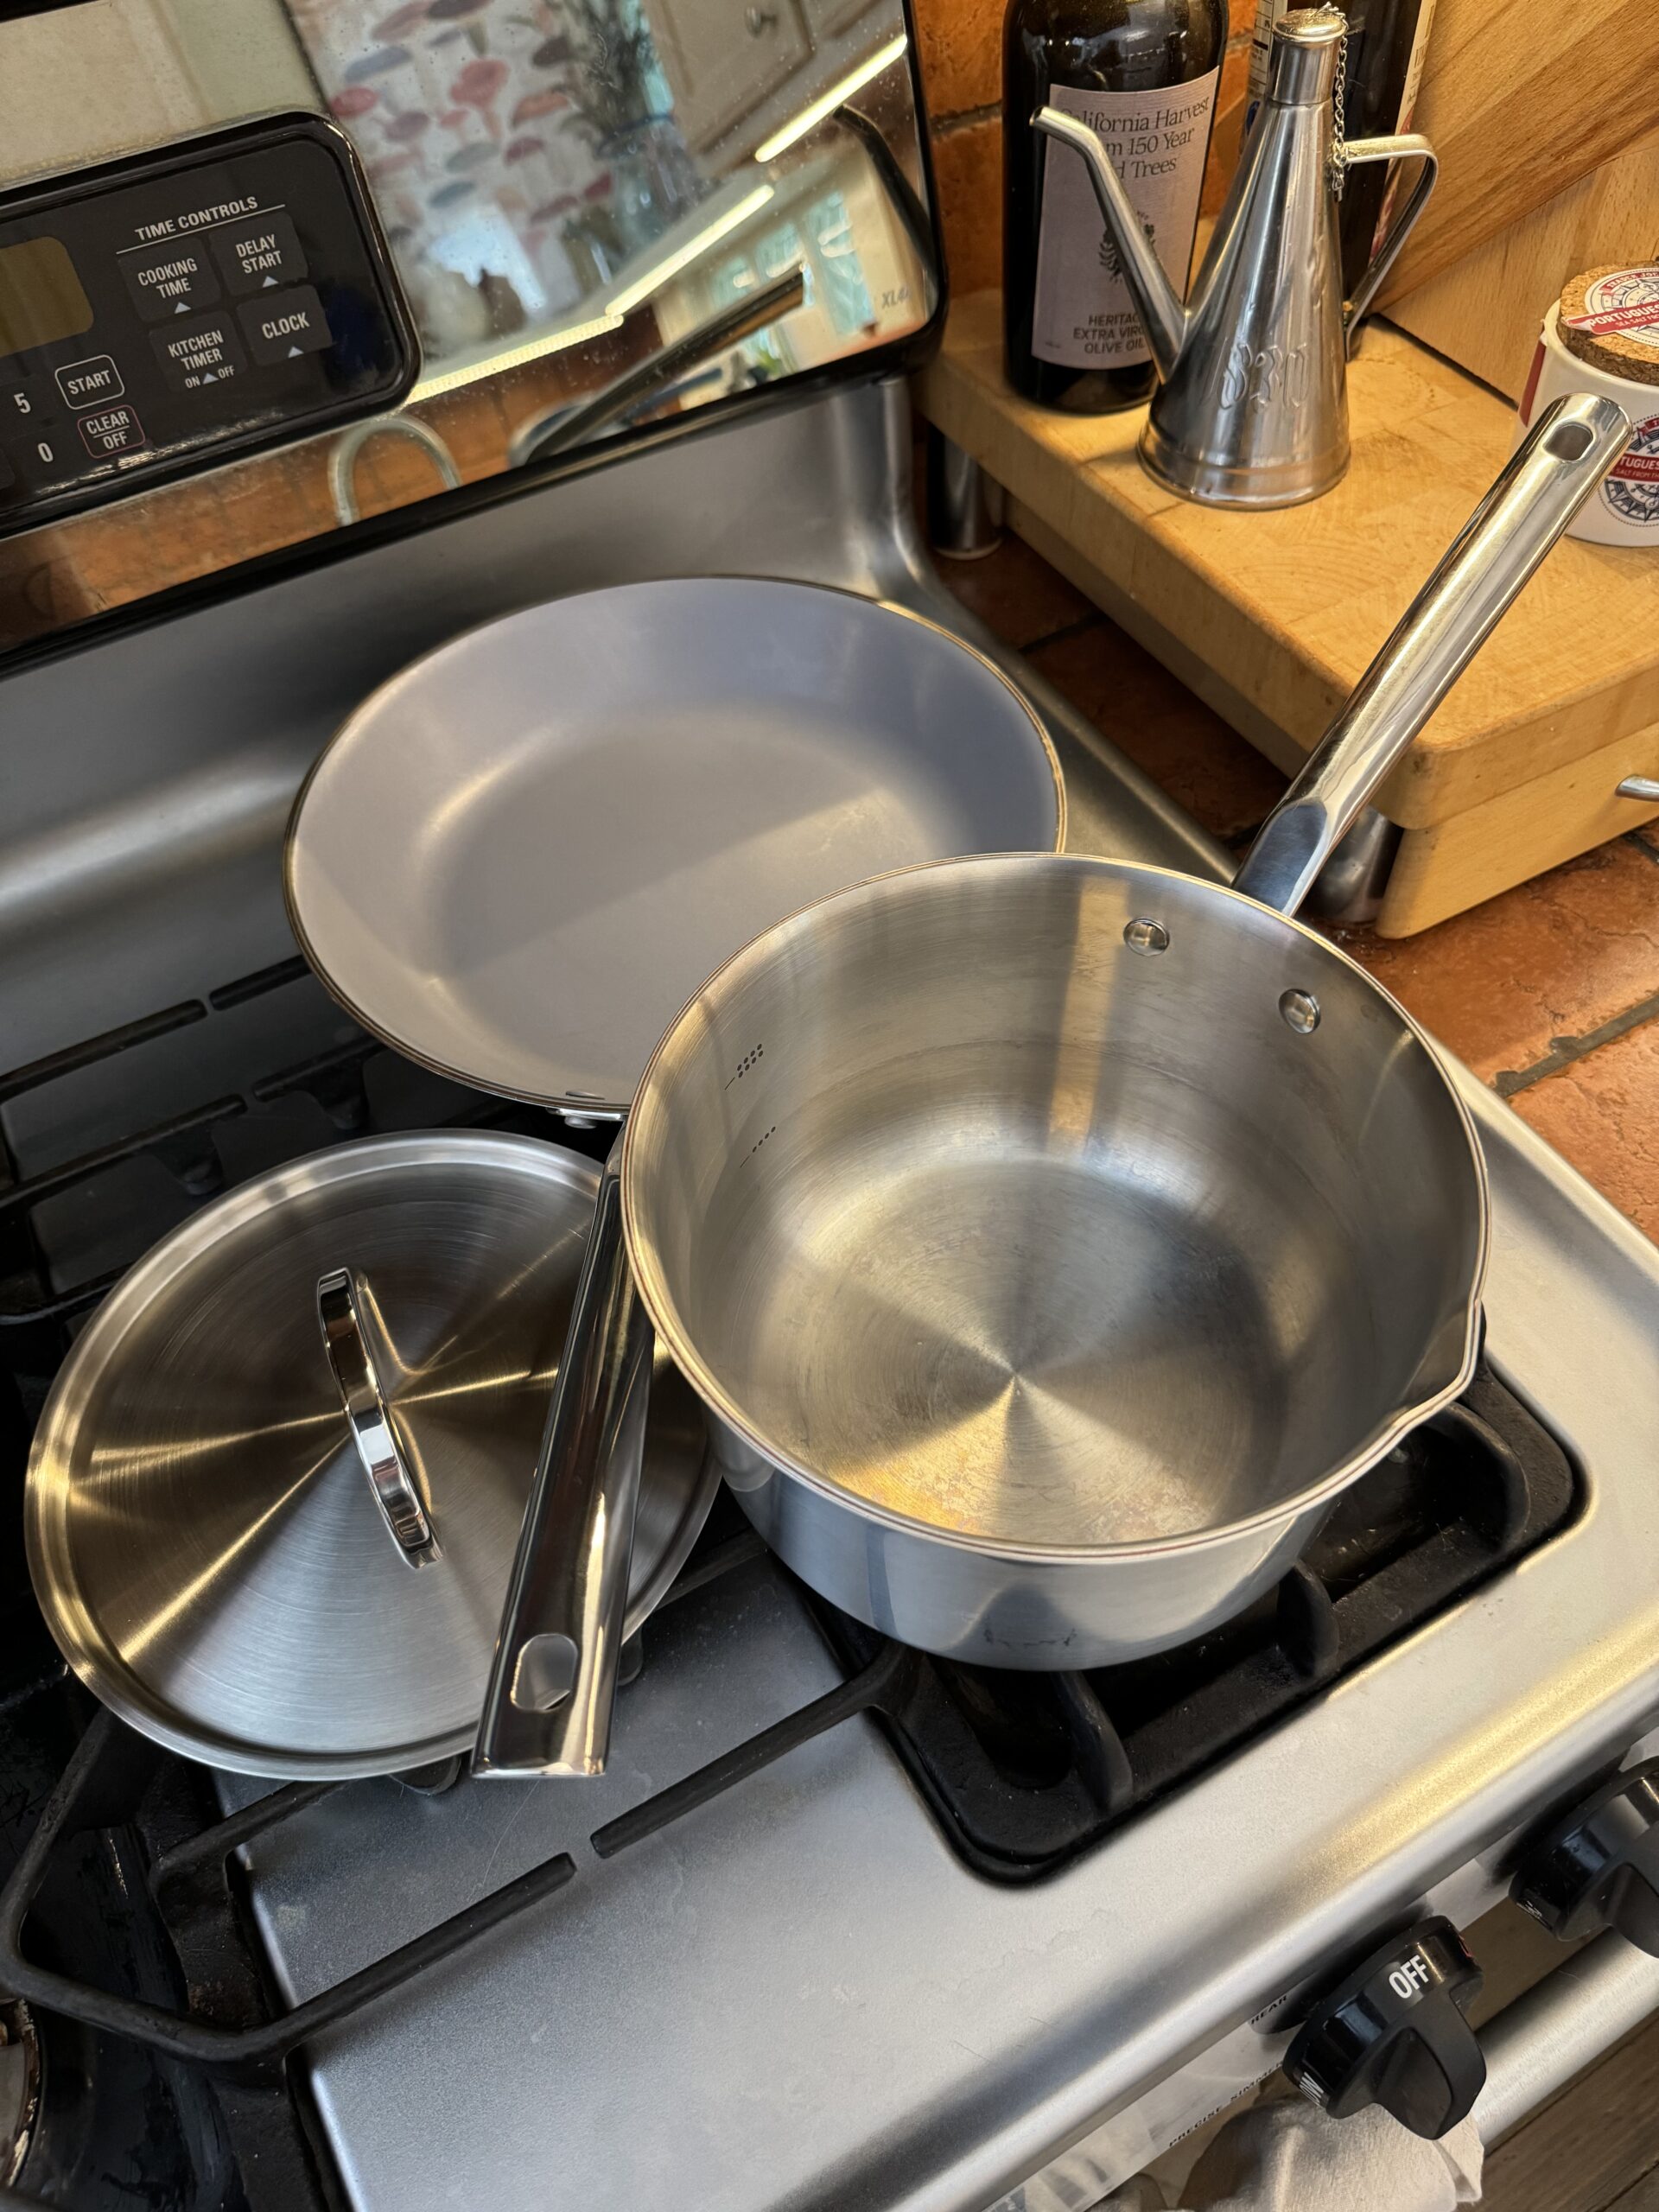 A saucepan with lid and a frying pan, both made of stainless steel, are positioned on a gas stove burner. Nearby are two bottles with metallic pour spouts and some kitchen counter items.